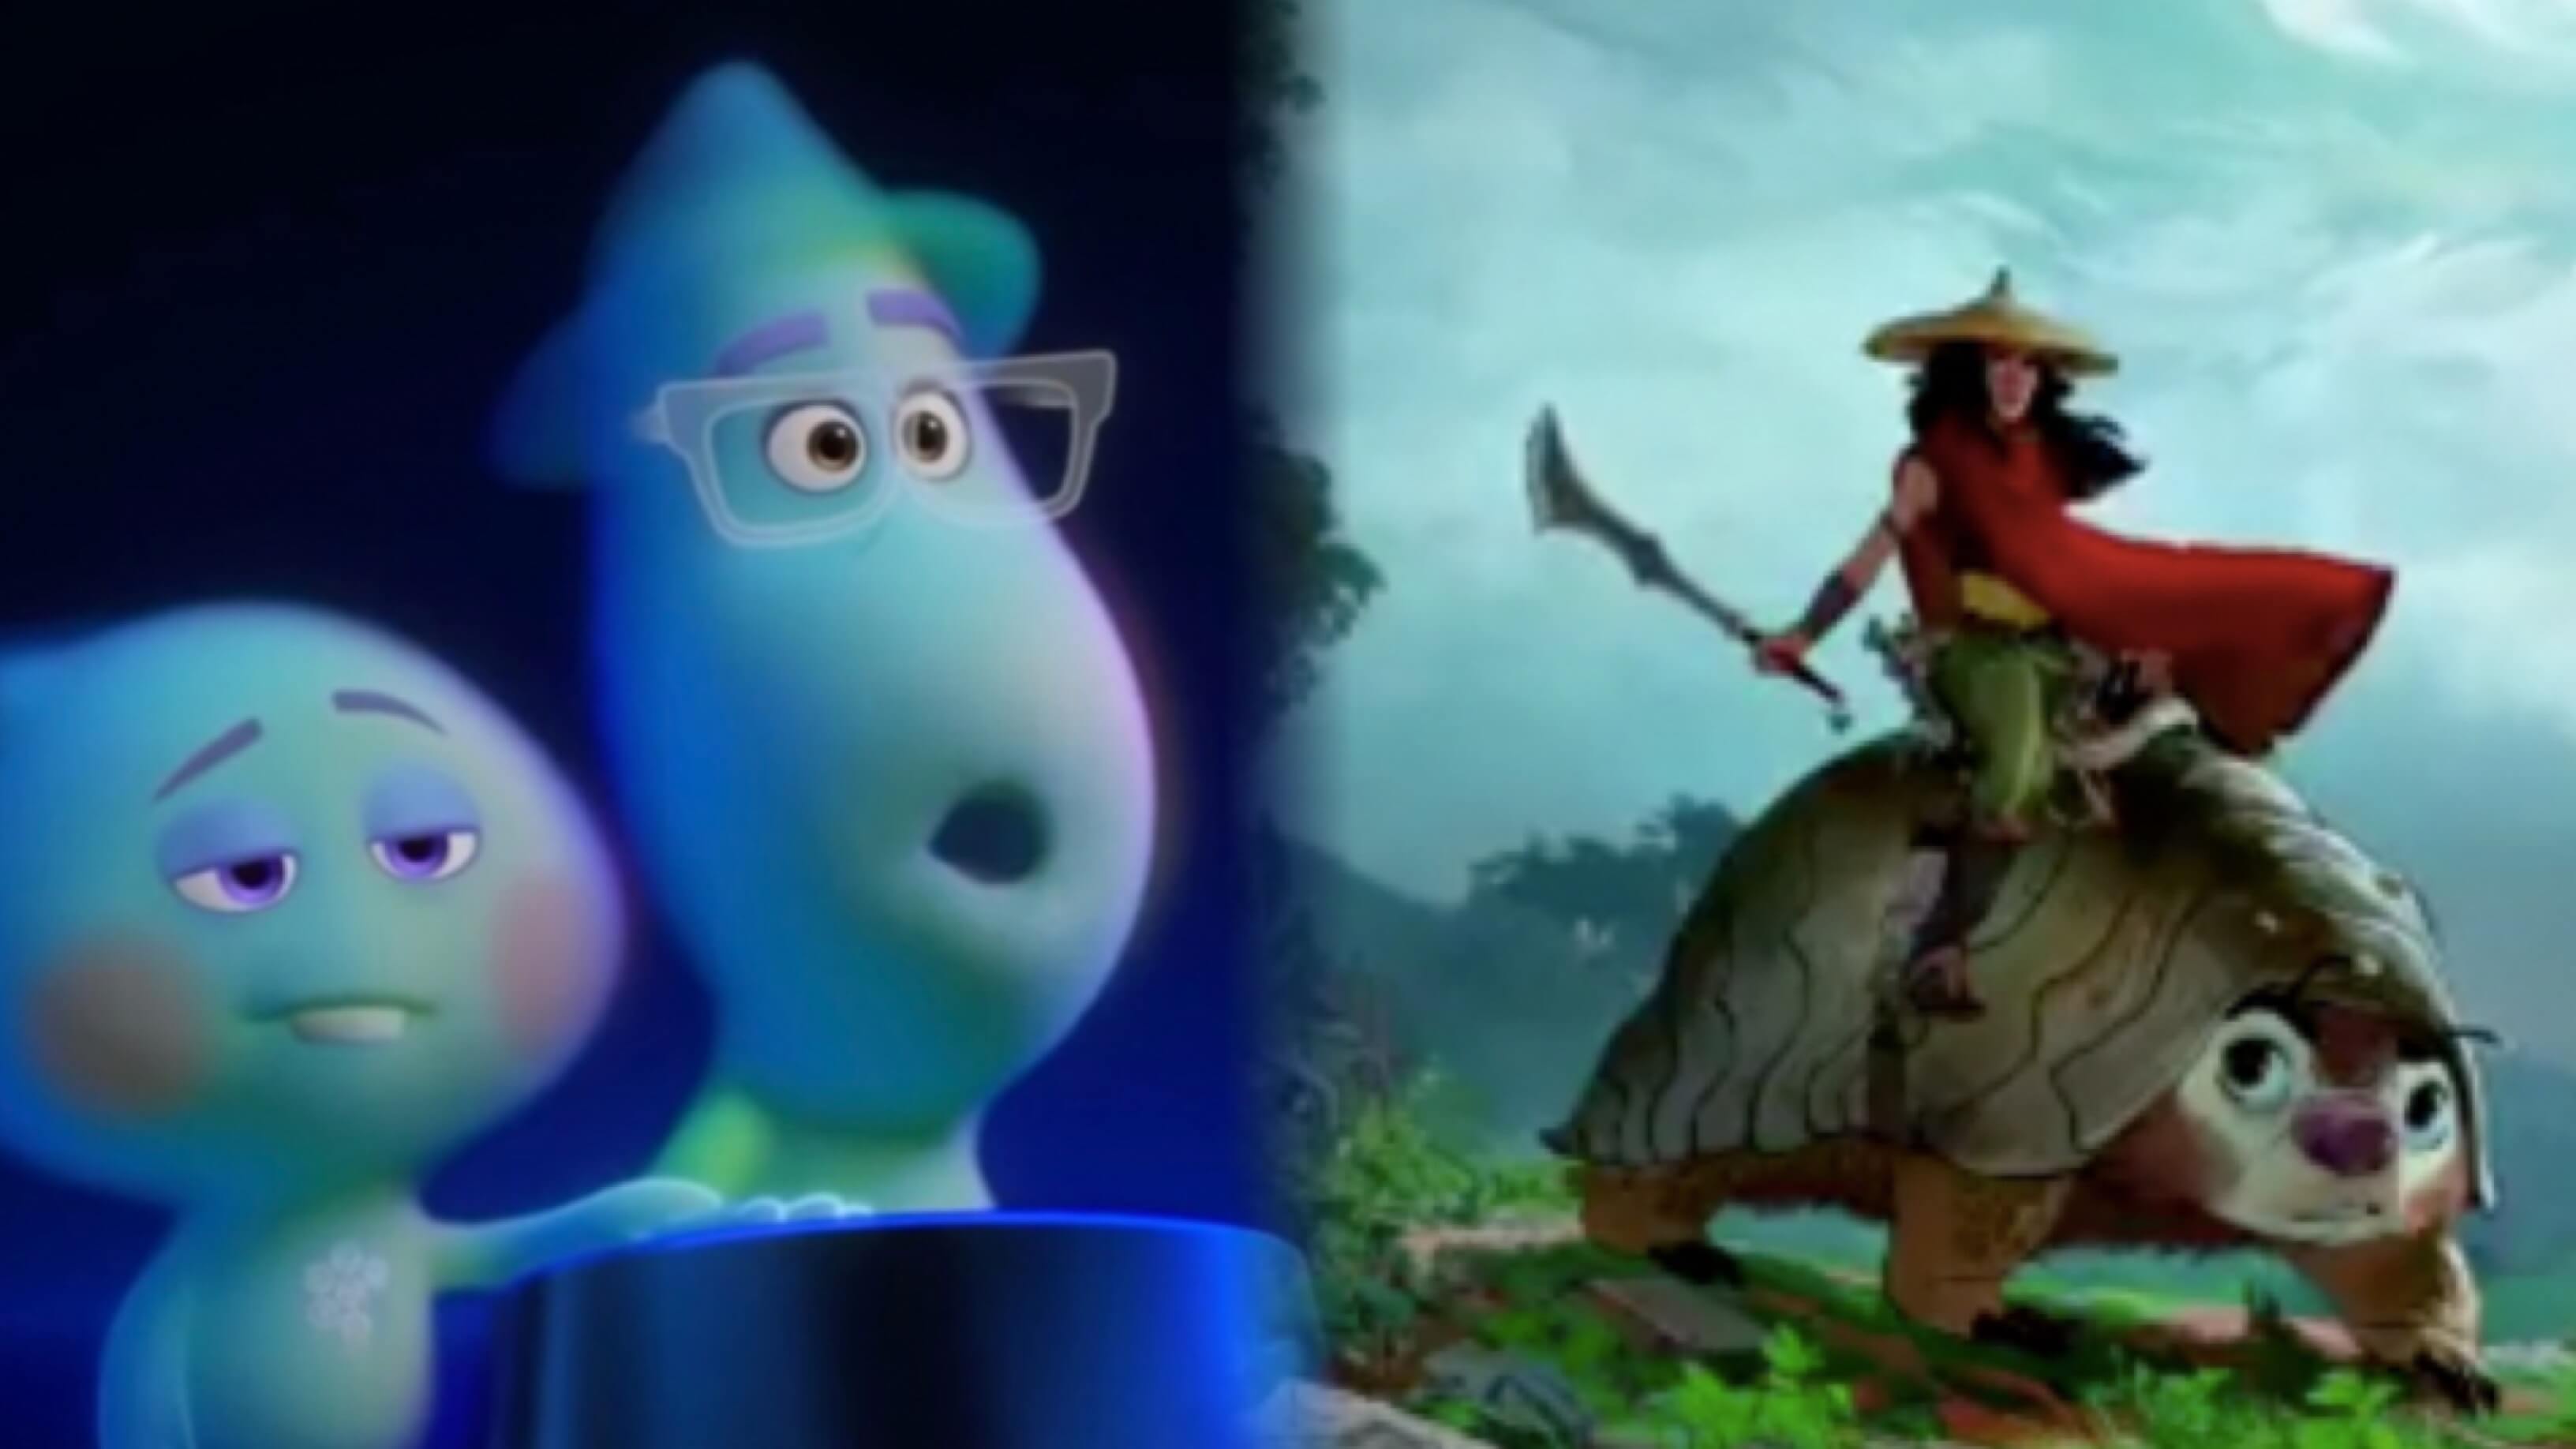 Pixar’s ‘Soul’ Moves to November, While Disney’s ‘Raya and the Last Dragon’ Moves to March 2021